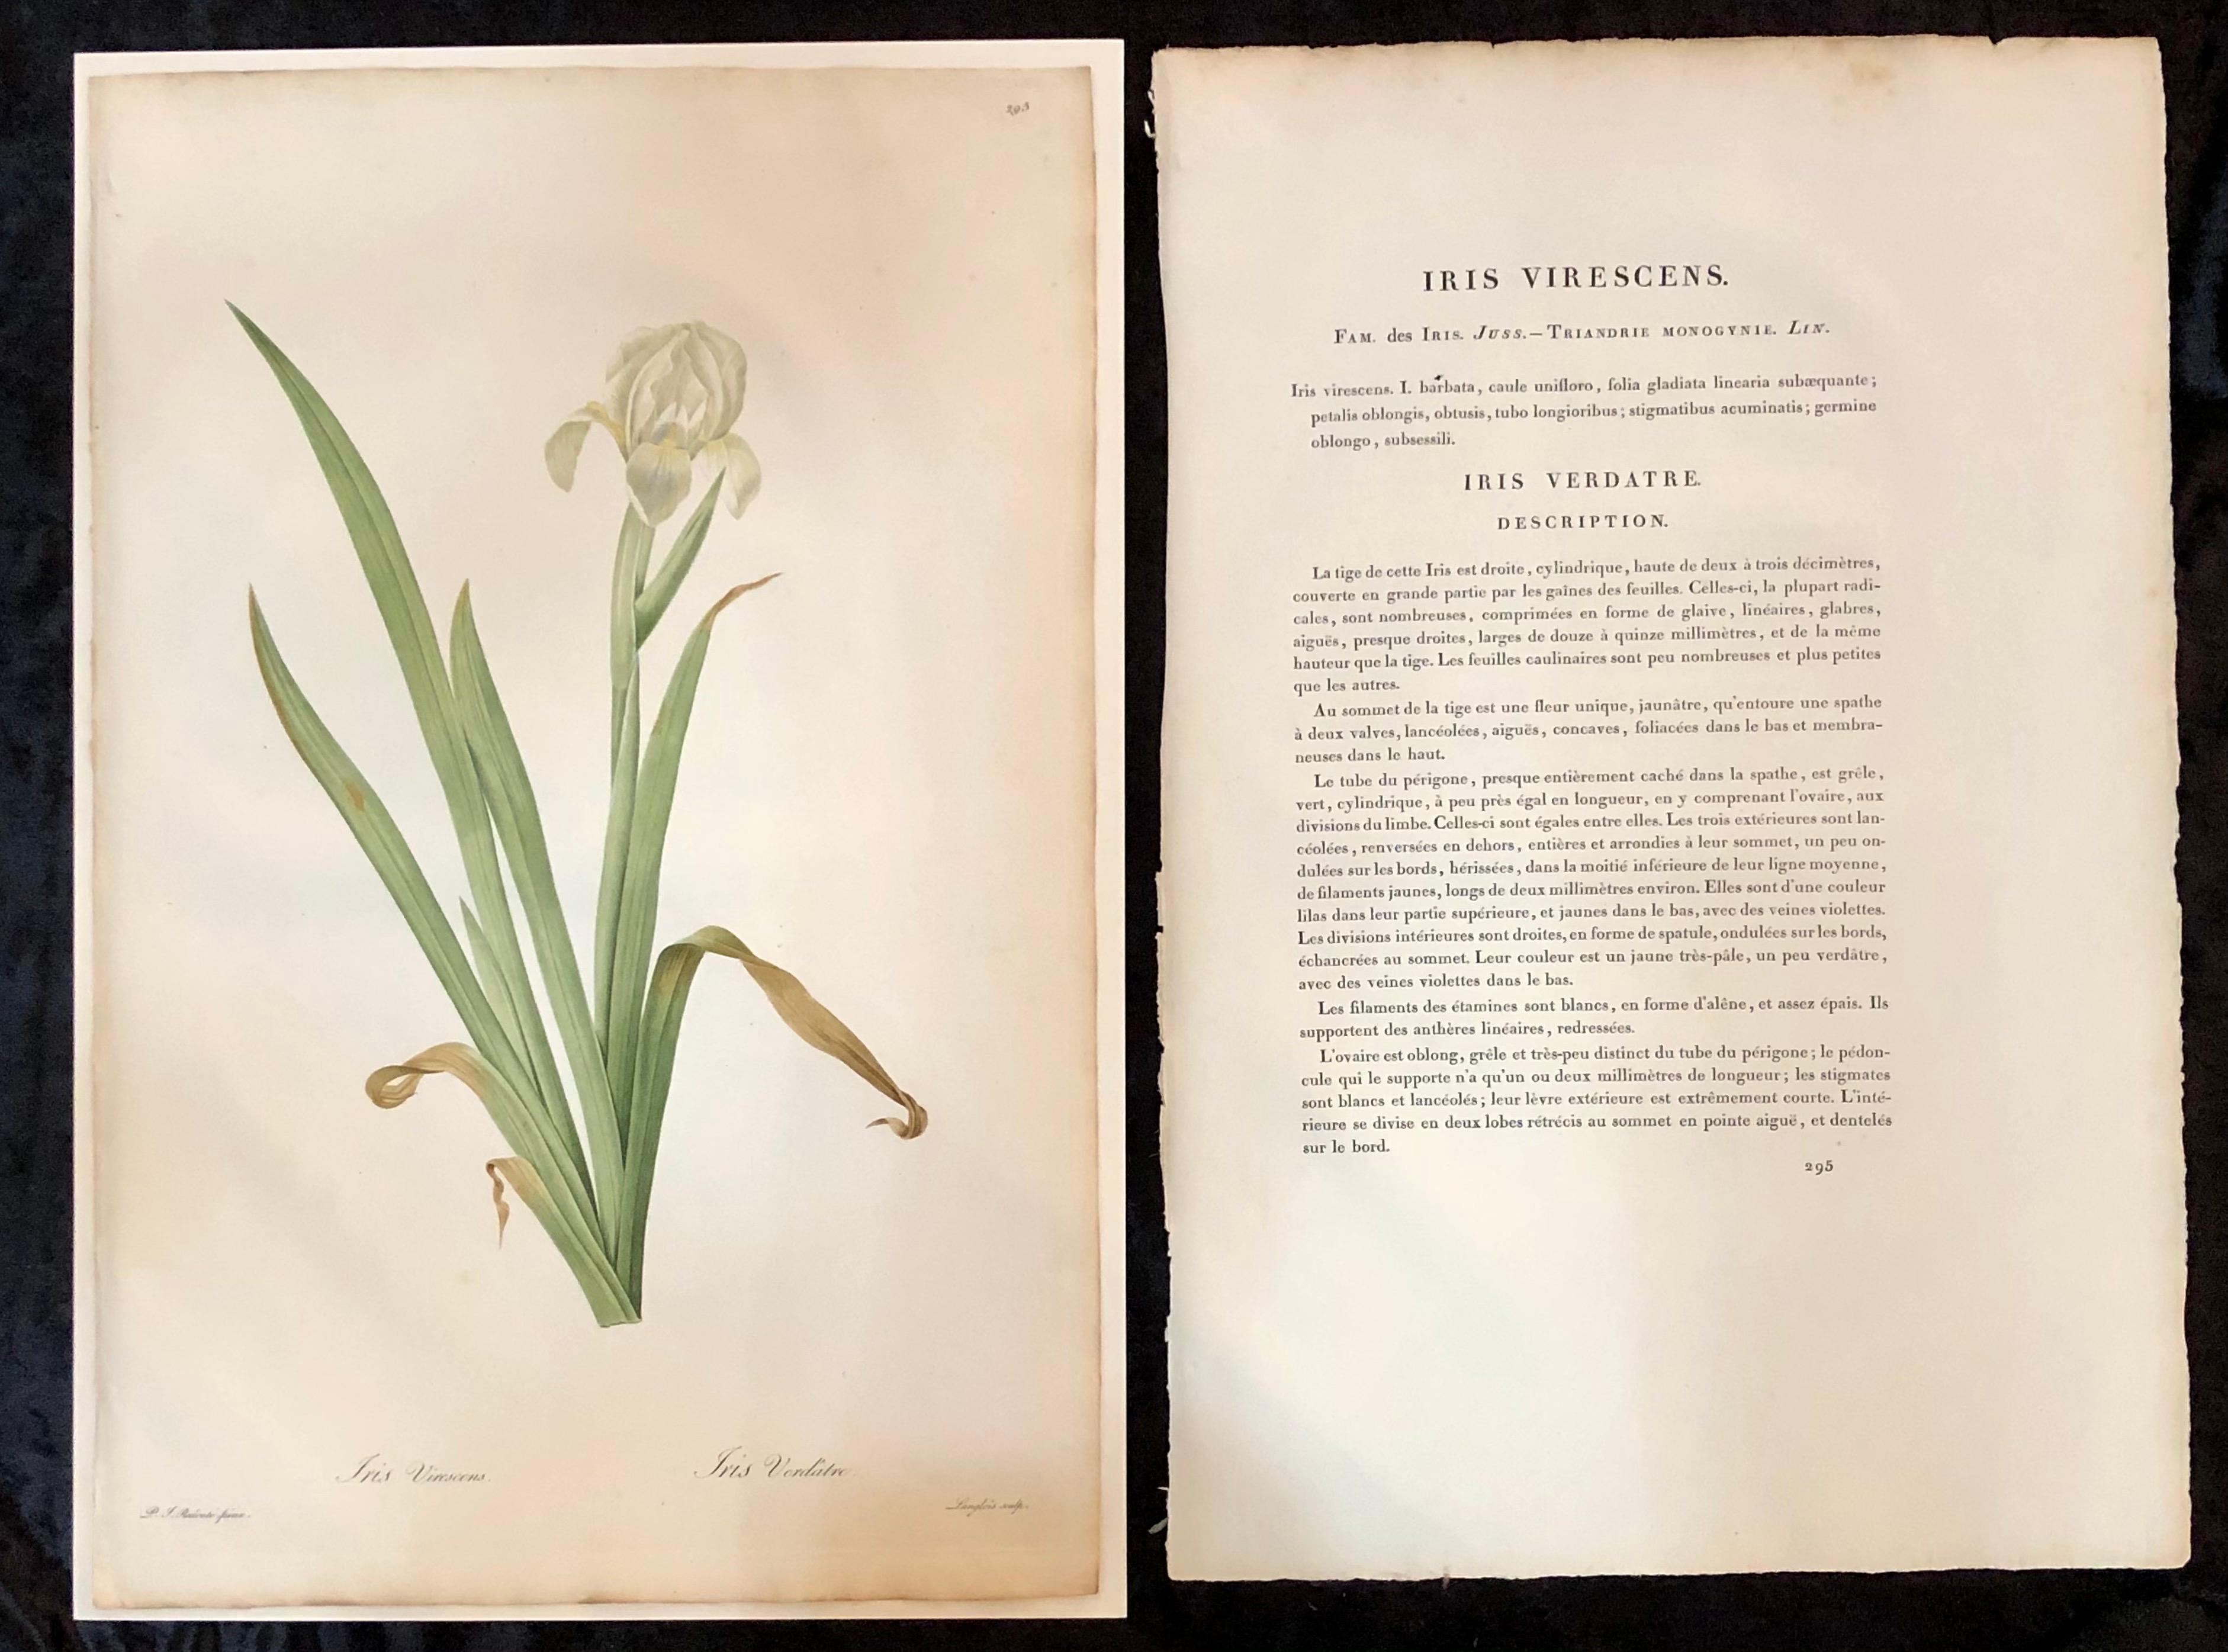 Iris Virescens hand colored engraving signed and numbered P. J. Redoute.
One of a set of large and impressive well painted set of nine floral works each having history and literature on reverse.
The highest peak of Redoute's artistic and botanical